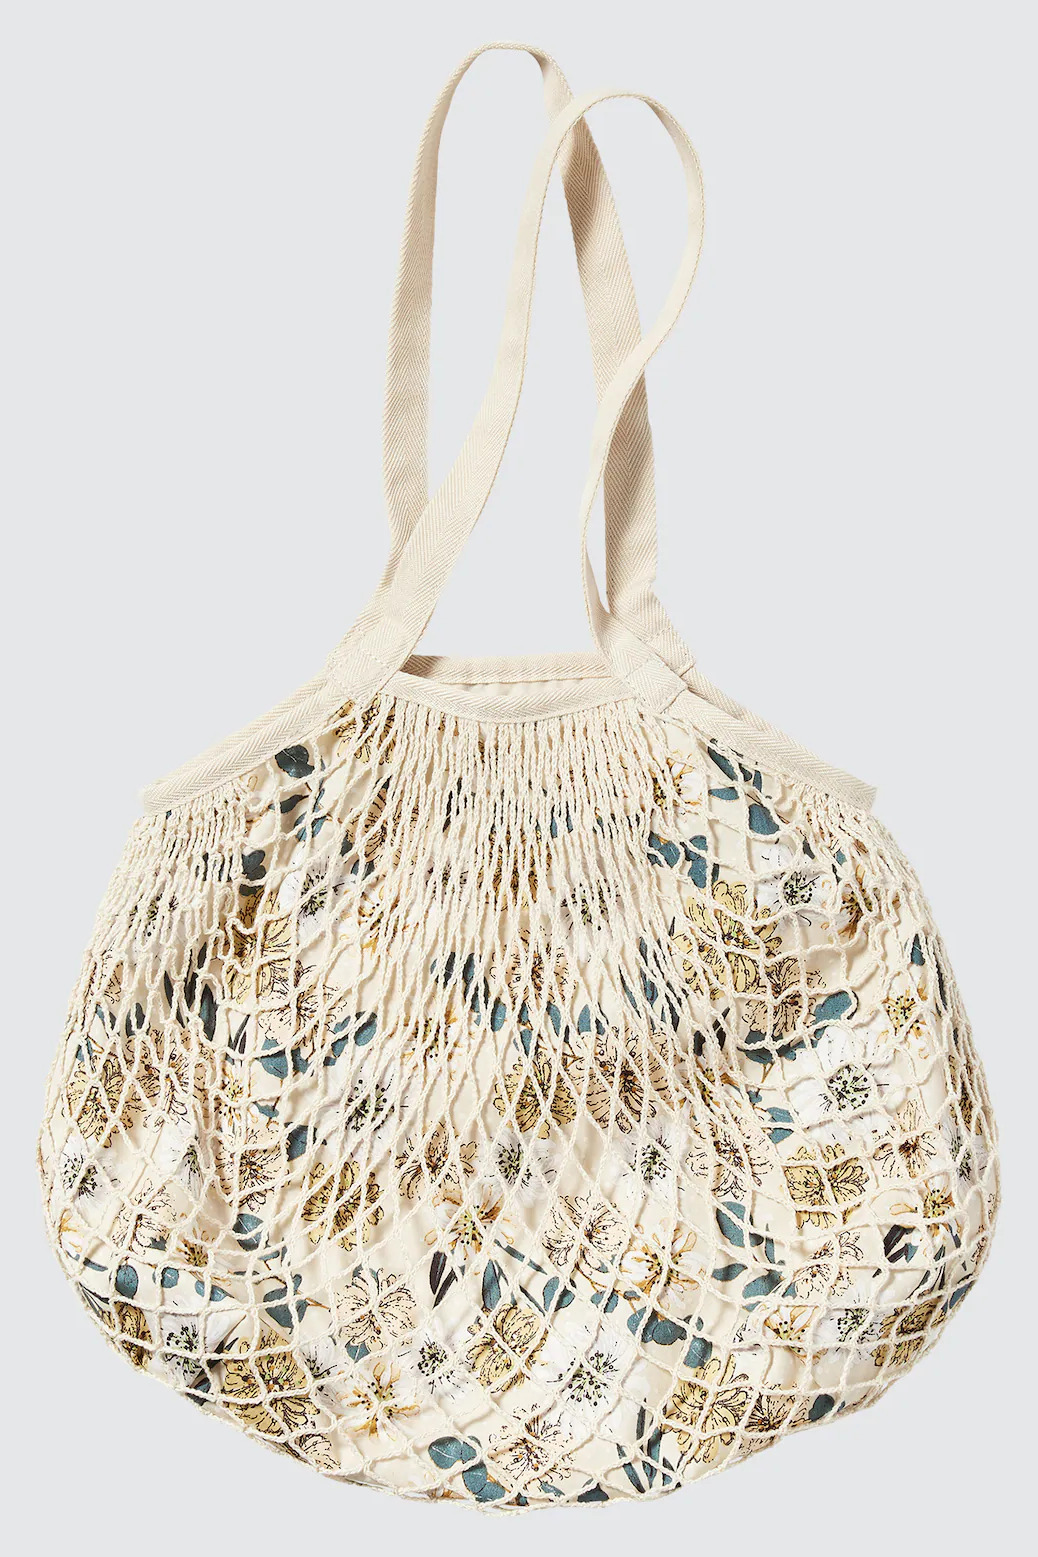 uniqlo netted bag